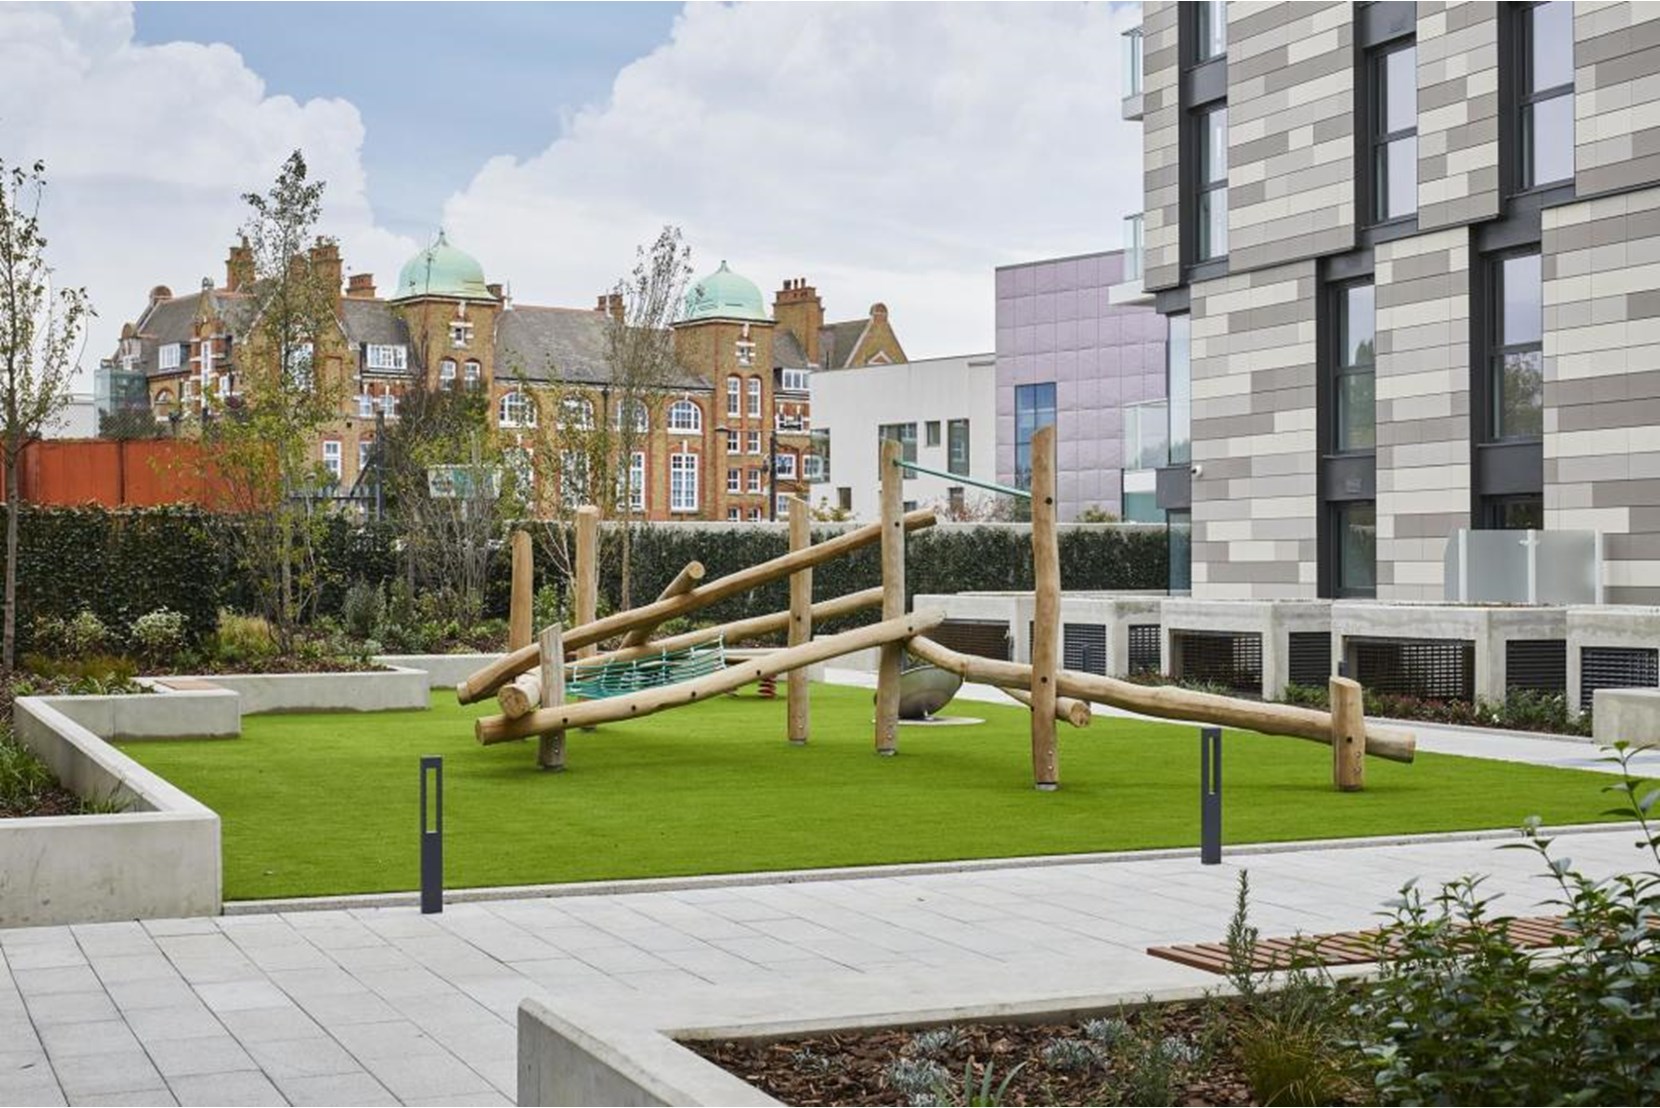 Apartments to Rent by Savills at The Highline, Tower Hamlets, E14, communal gardens